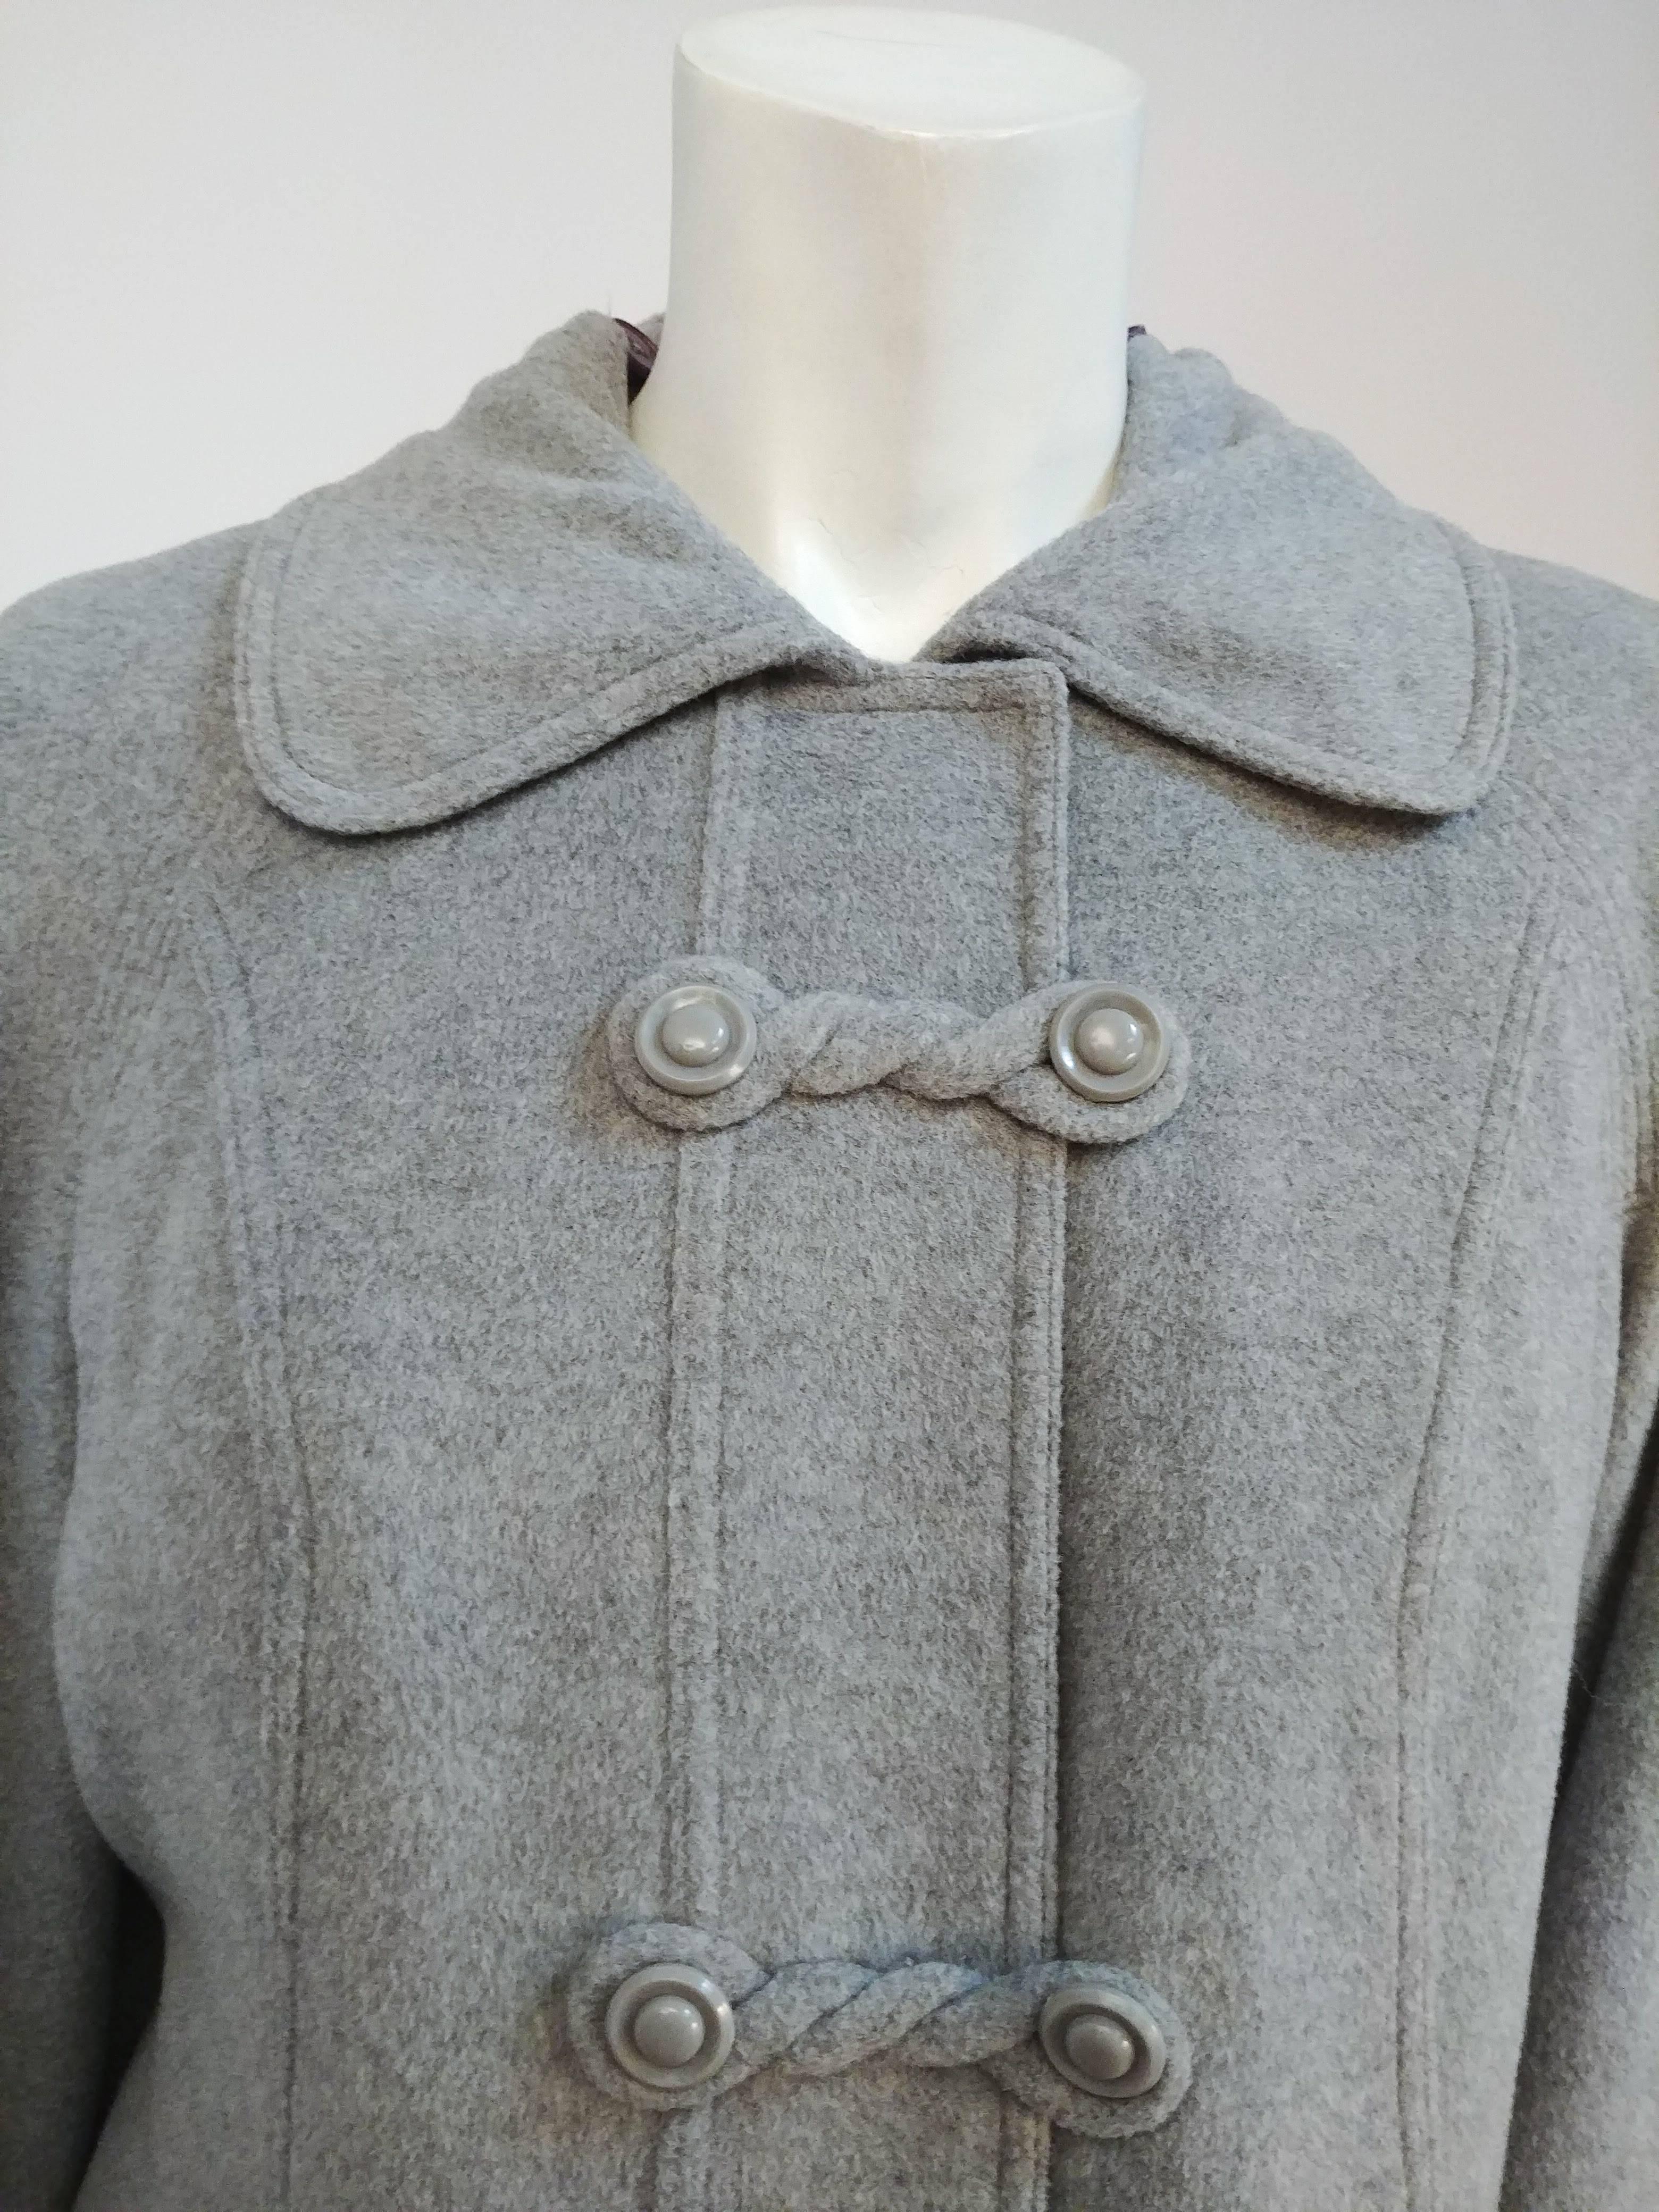 1970s Grey Wool Hooded Coat. Detachable hood buttons on at neck. Frog claps down front. Faux fur lining can be unzipped and removed for lighter wear. Beautiful quilting detail on coat facing. 